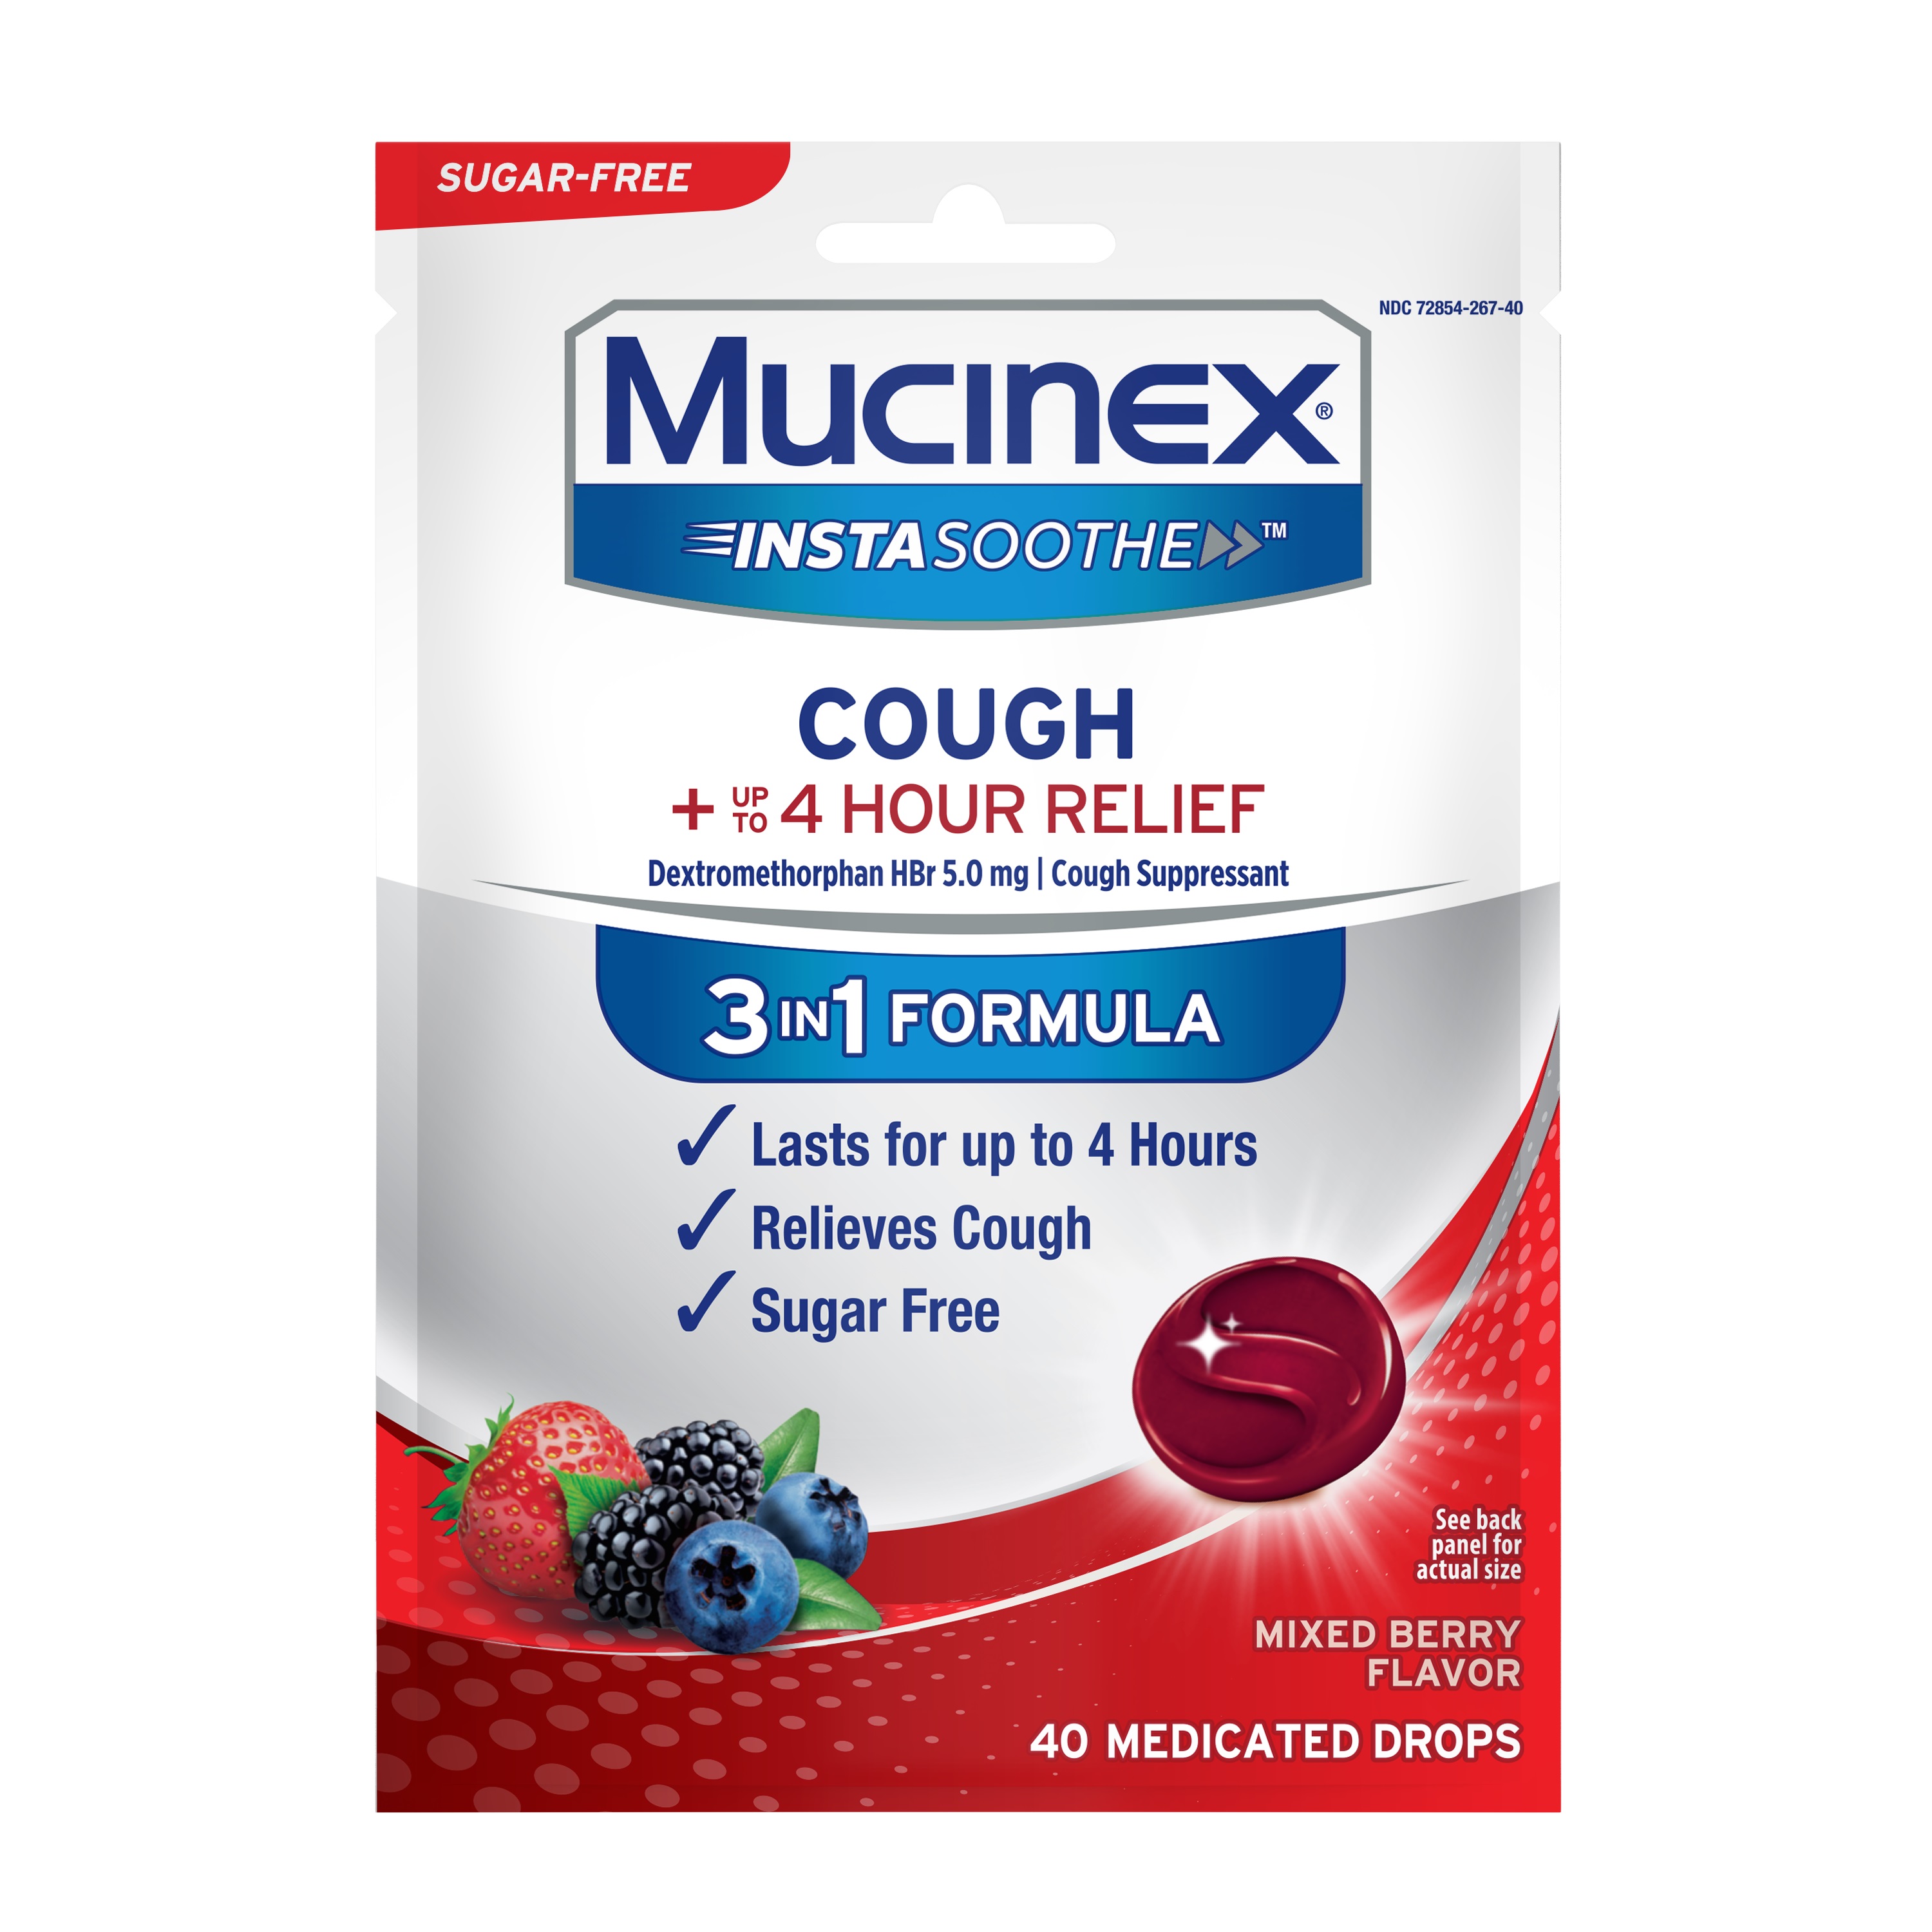 MUCINEX® Instasoothe™ Medicated Cough Drops - Mixed Berry